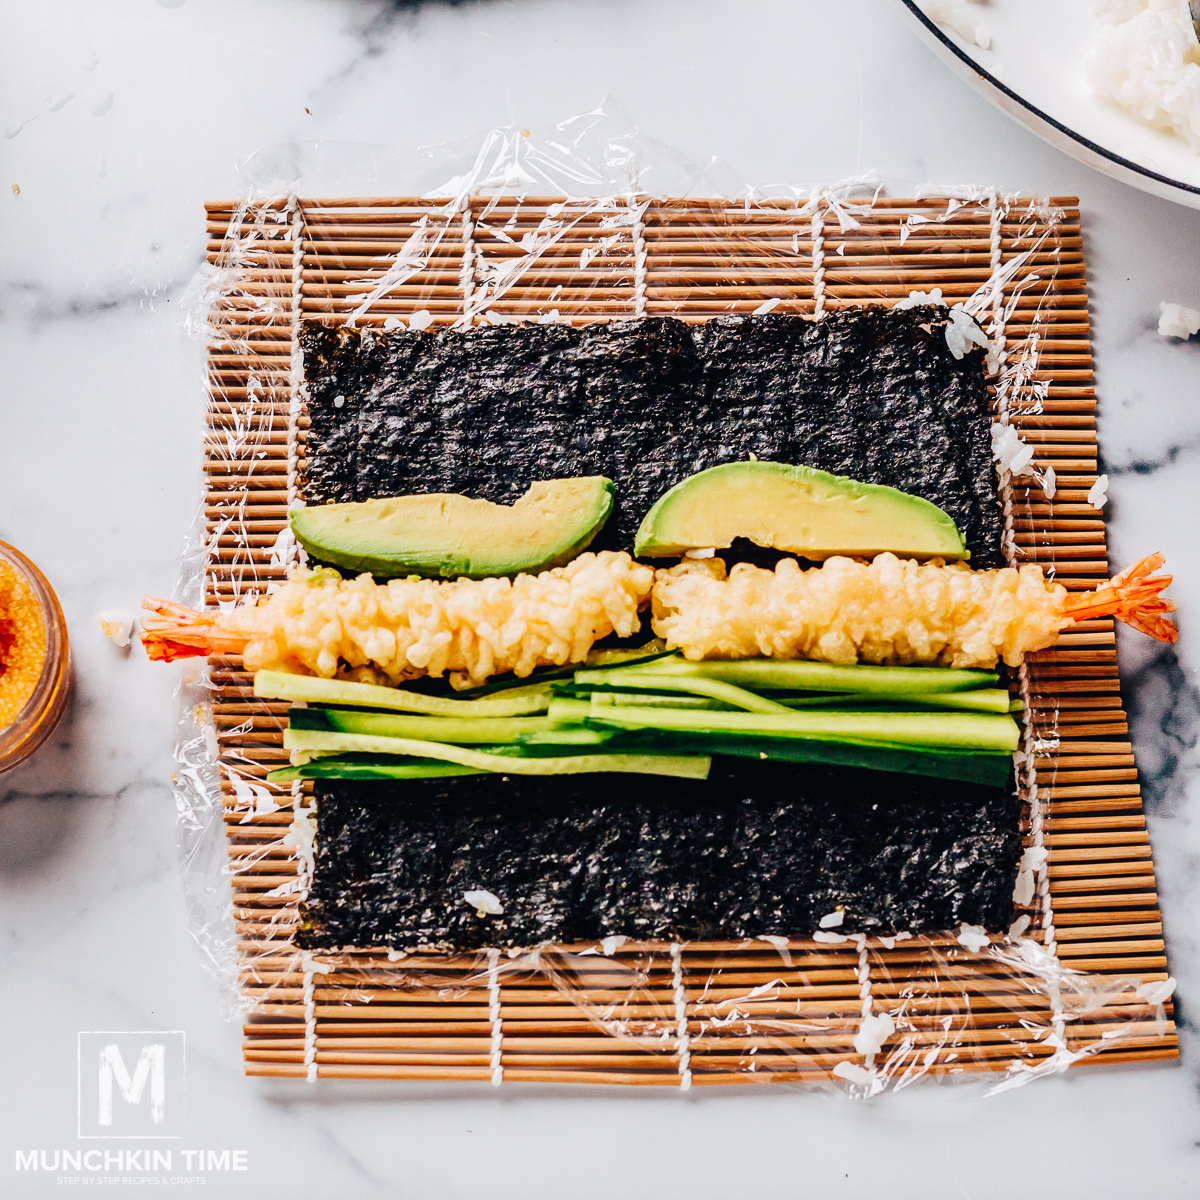 Flip the nori and add the shrimp, cucumber, and avocado to the other side.